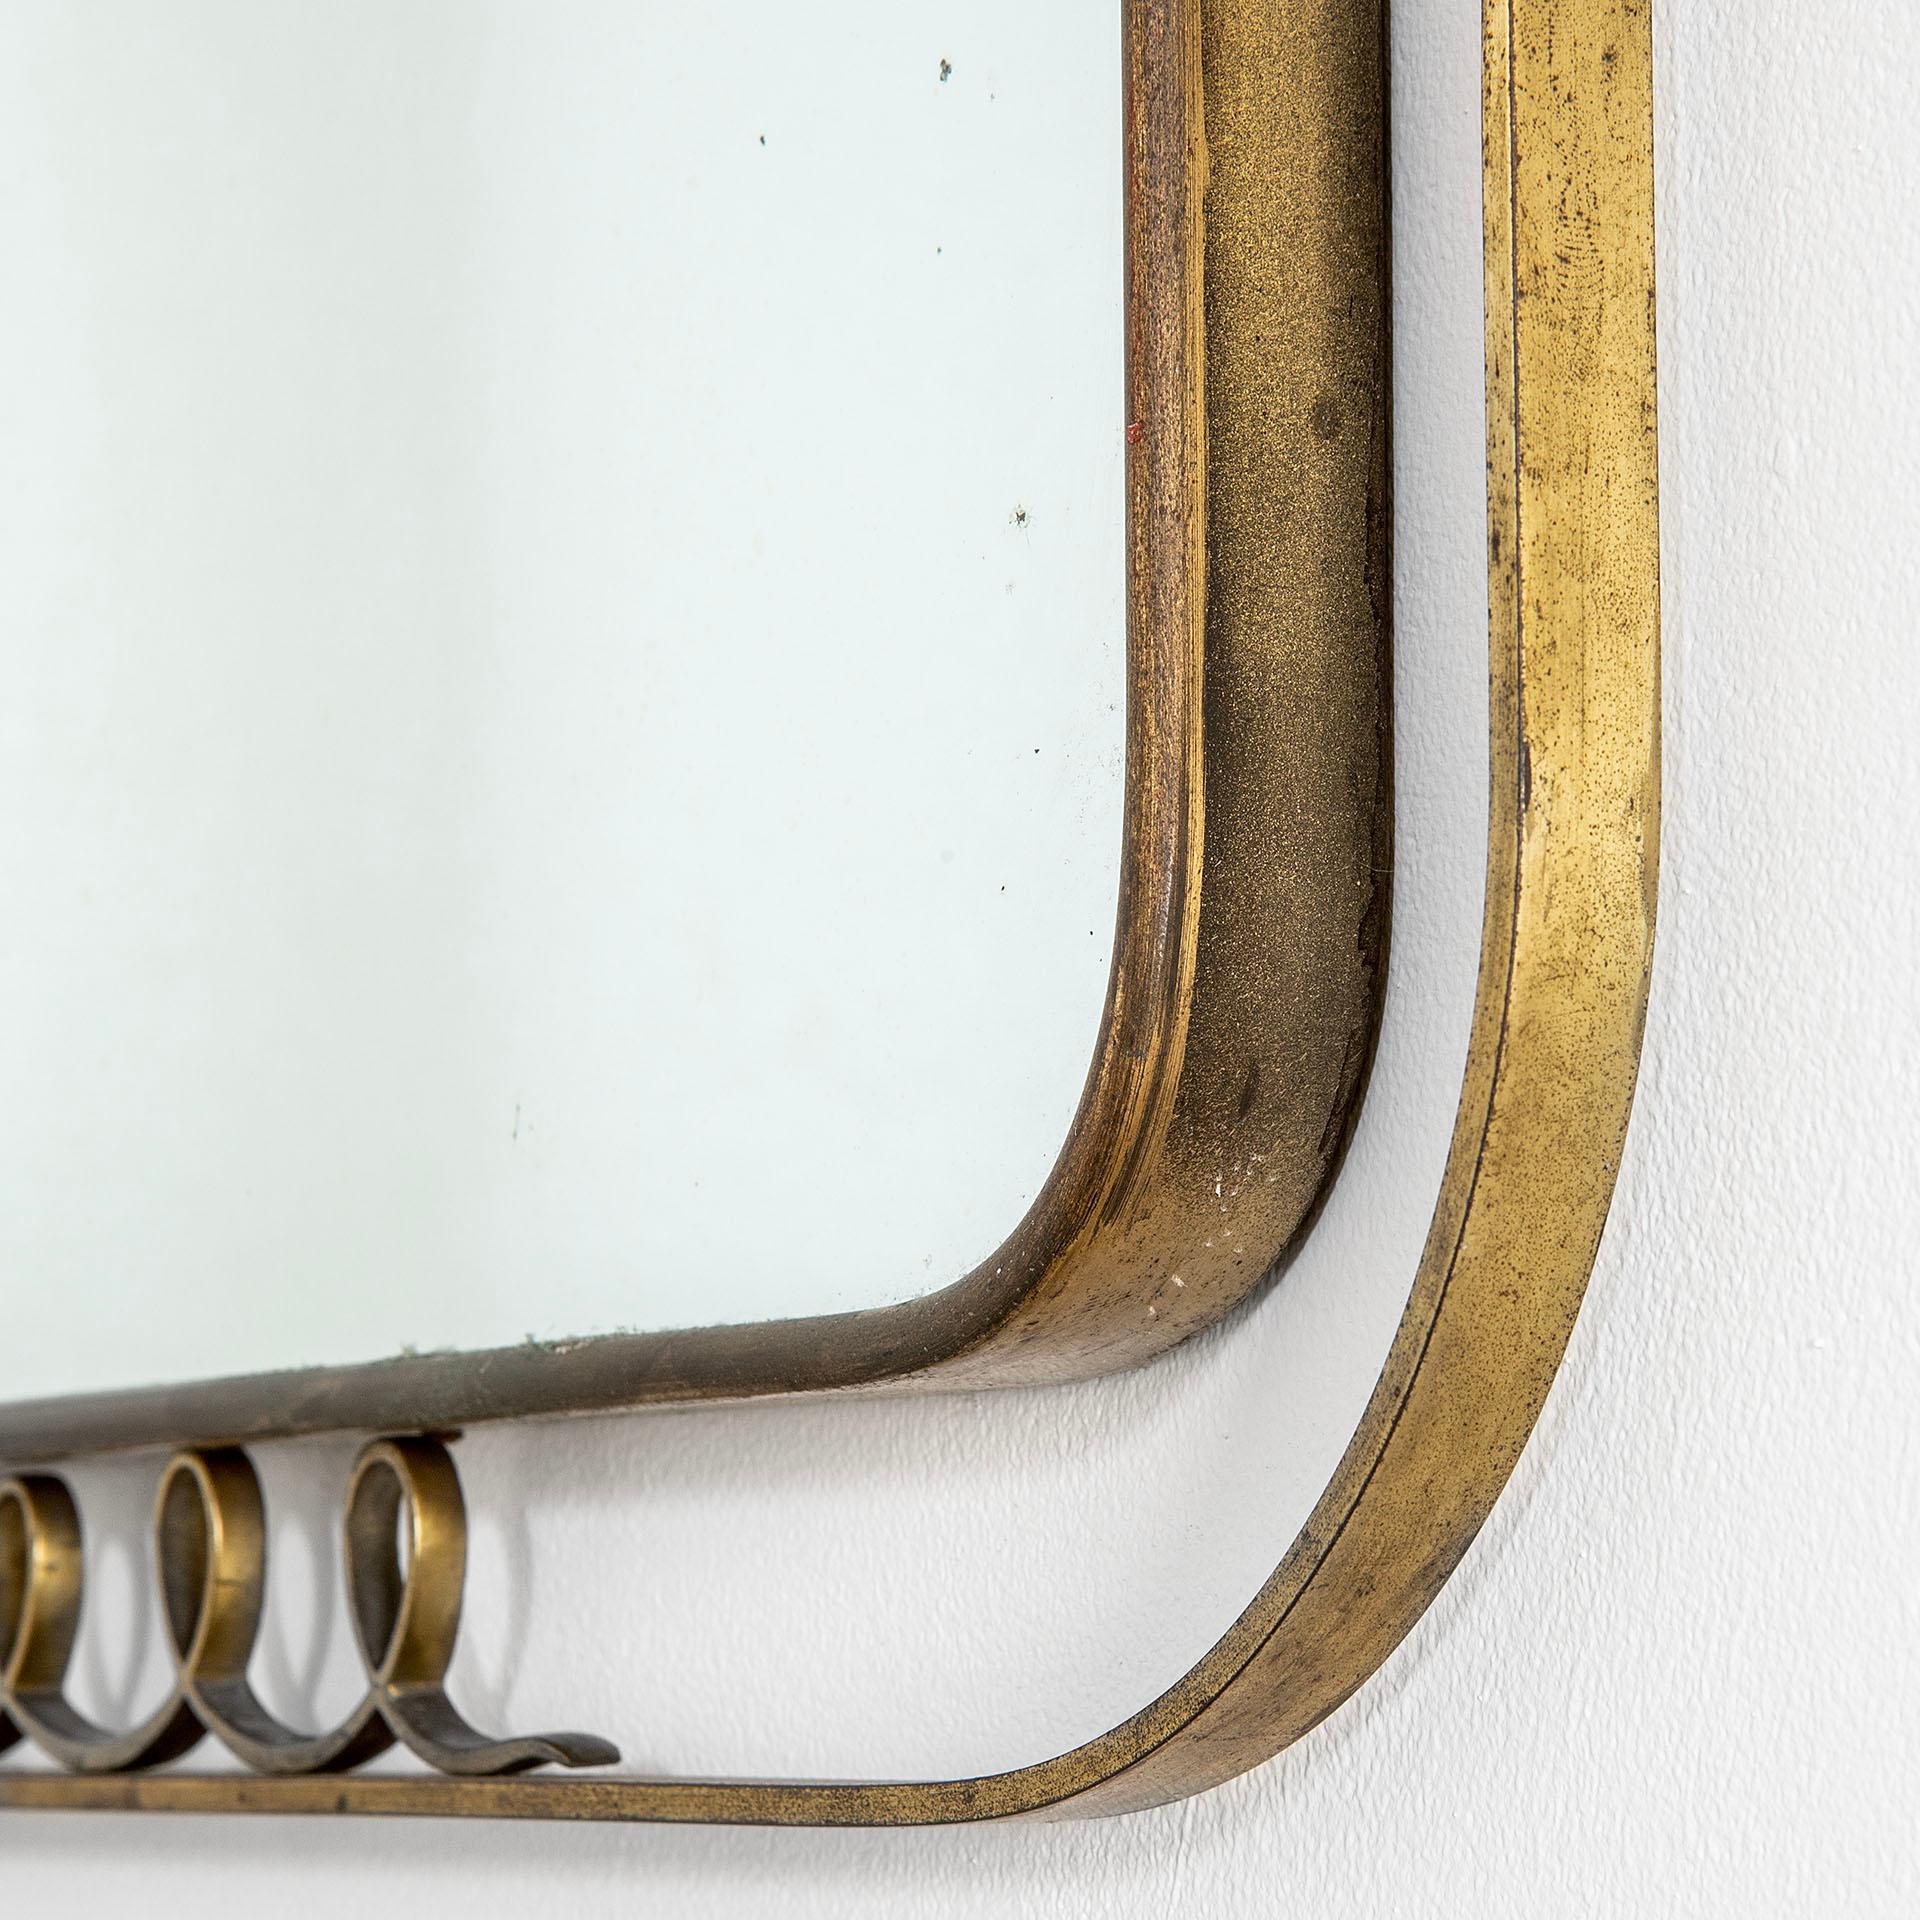 20th Century Gio Ponti Wall Mirror with Brass Frame for Luigi Fontana, 1930s In Good Condition For Sale In Turin, Turin